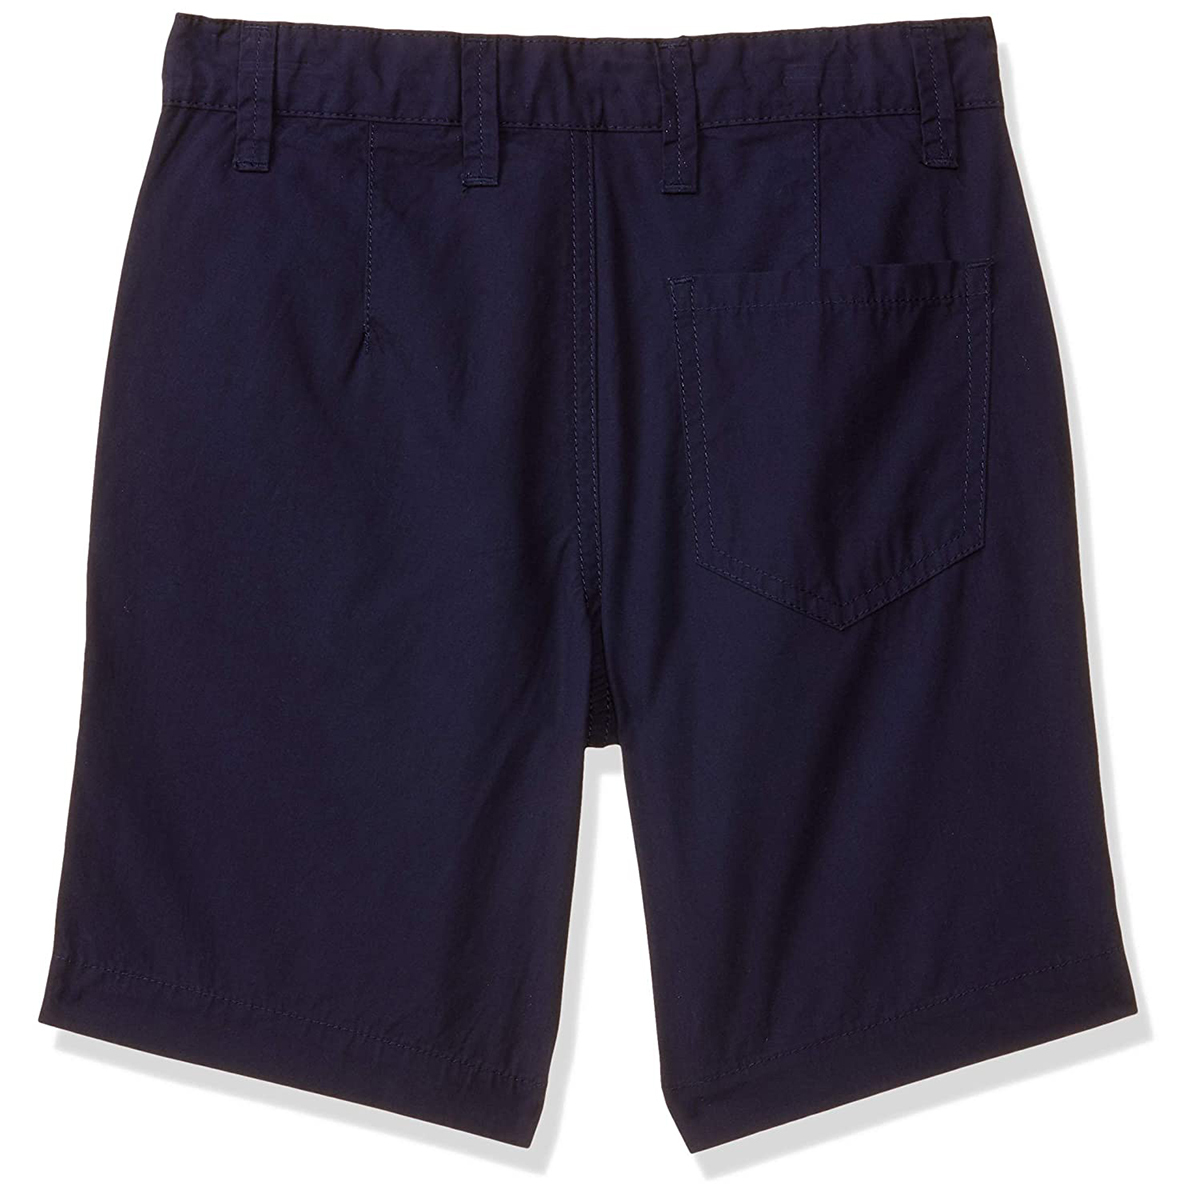 United Colors of Benetton Boy's Regular Fit Cotton Shorts- Navy Blue